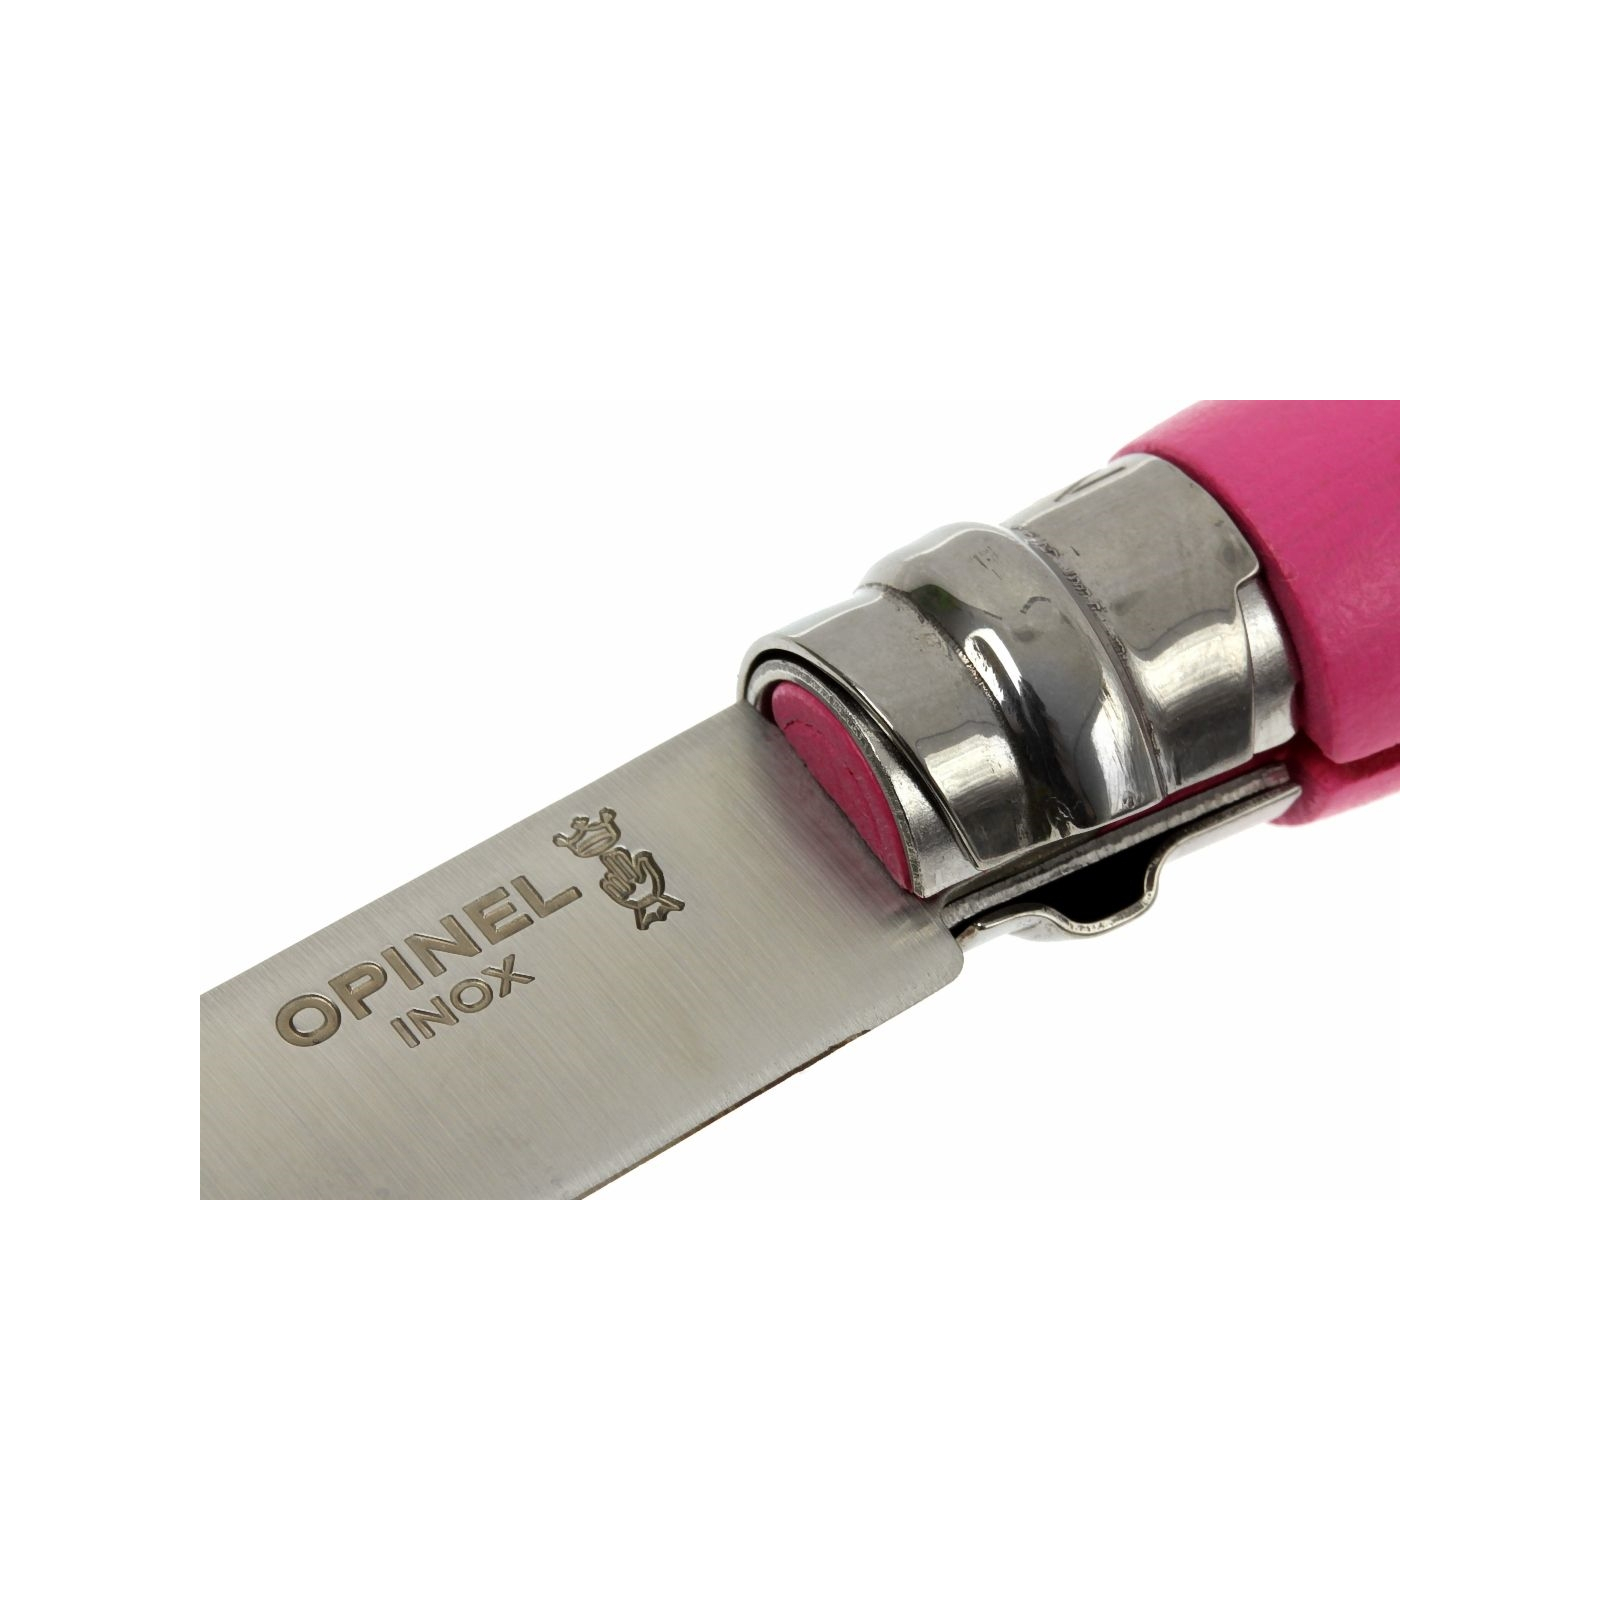 Нож Opinel №7 "My First Opinel" pink (001699) изображение 3